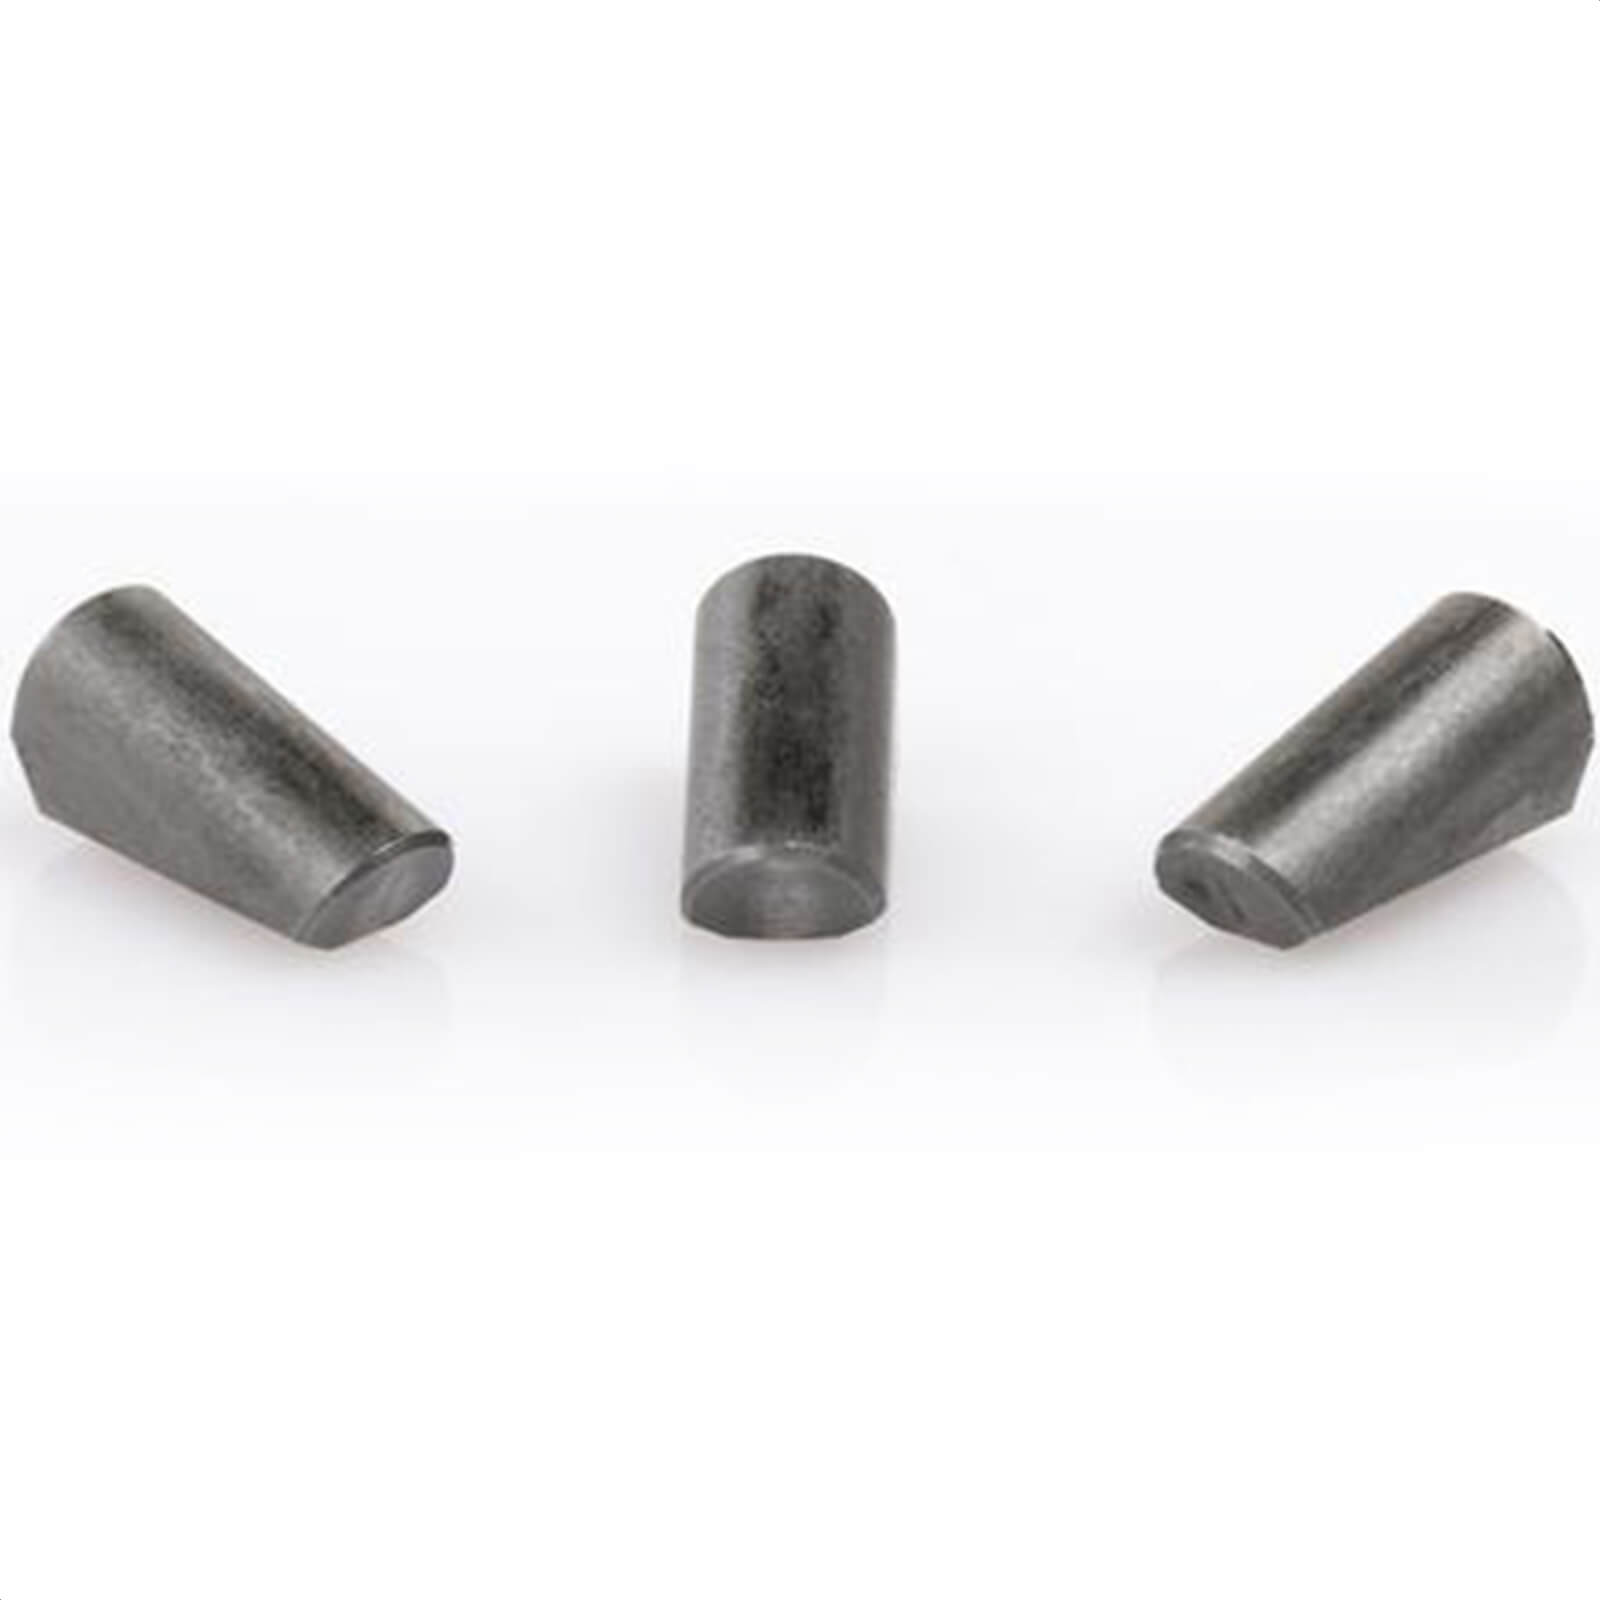 Image of Gesipa Spare Jaws for Bulb-Tite Blind Rivet for AccuBird and PowerBird Rivet Guns